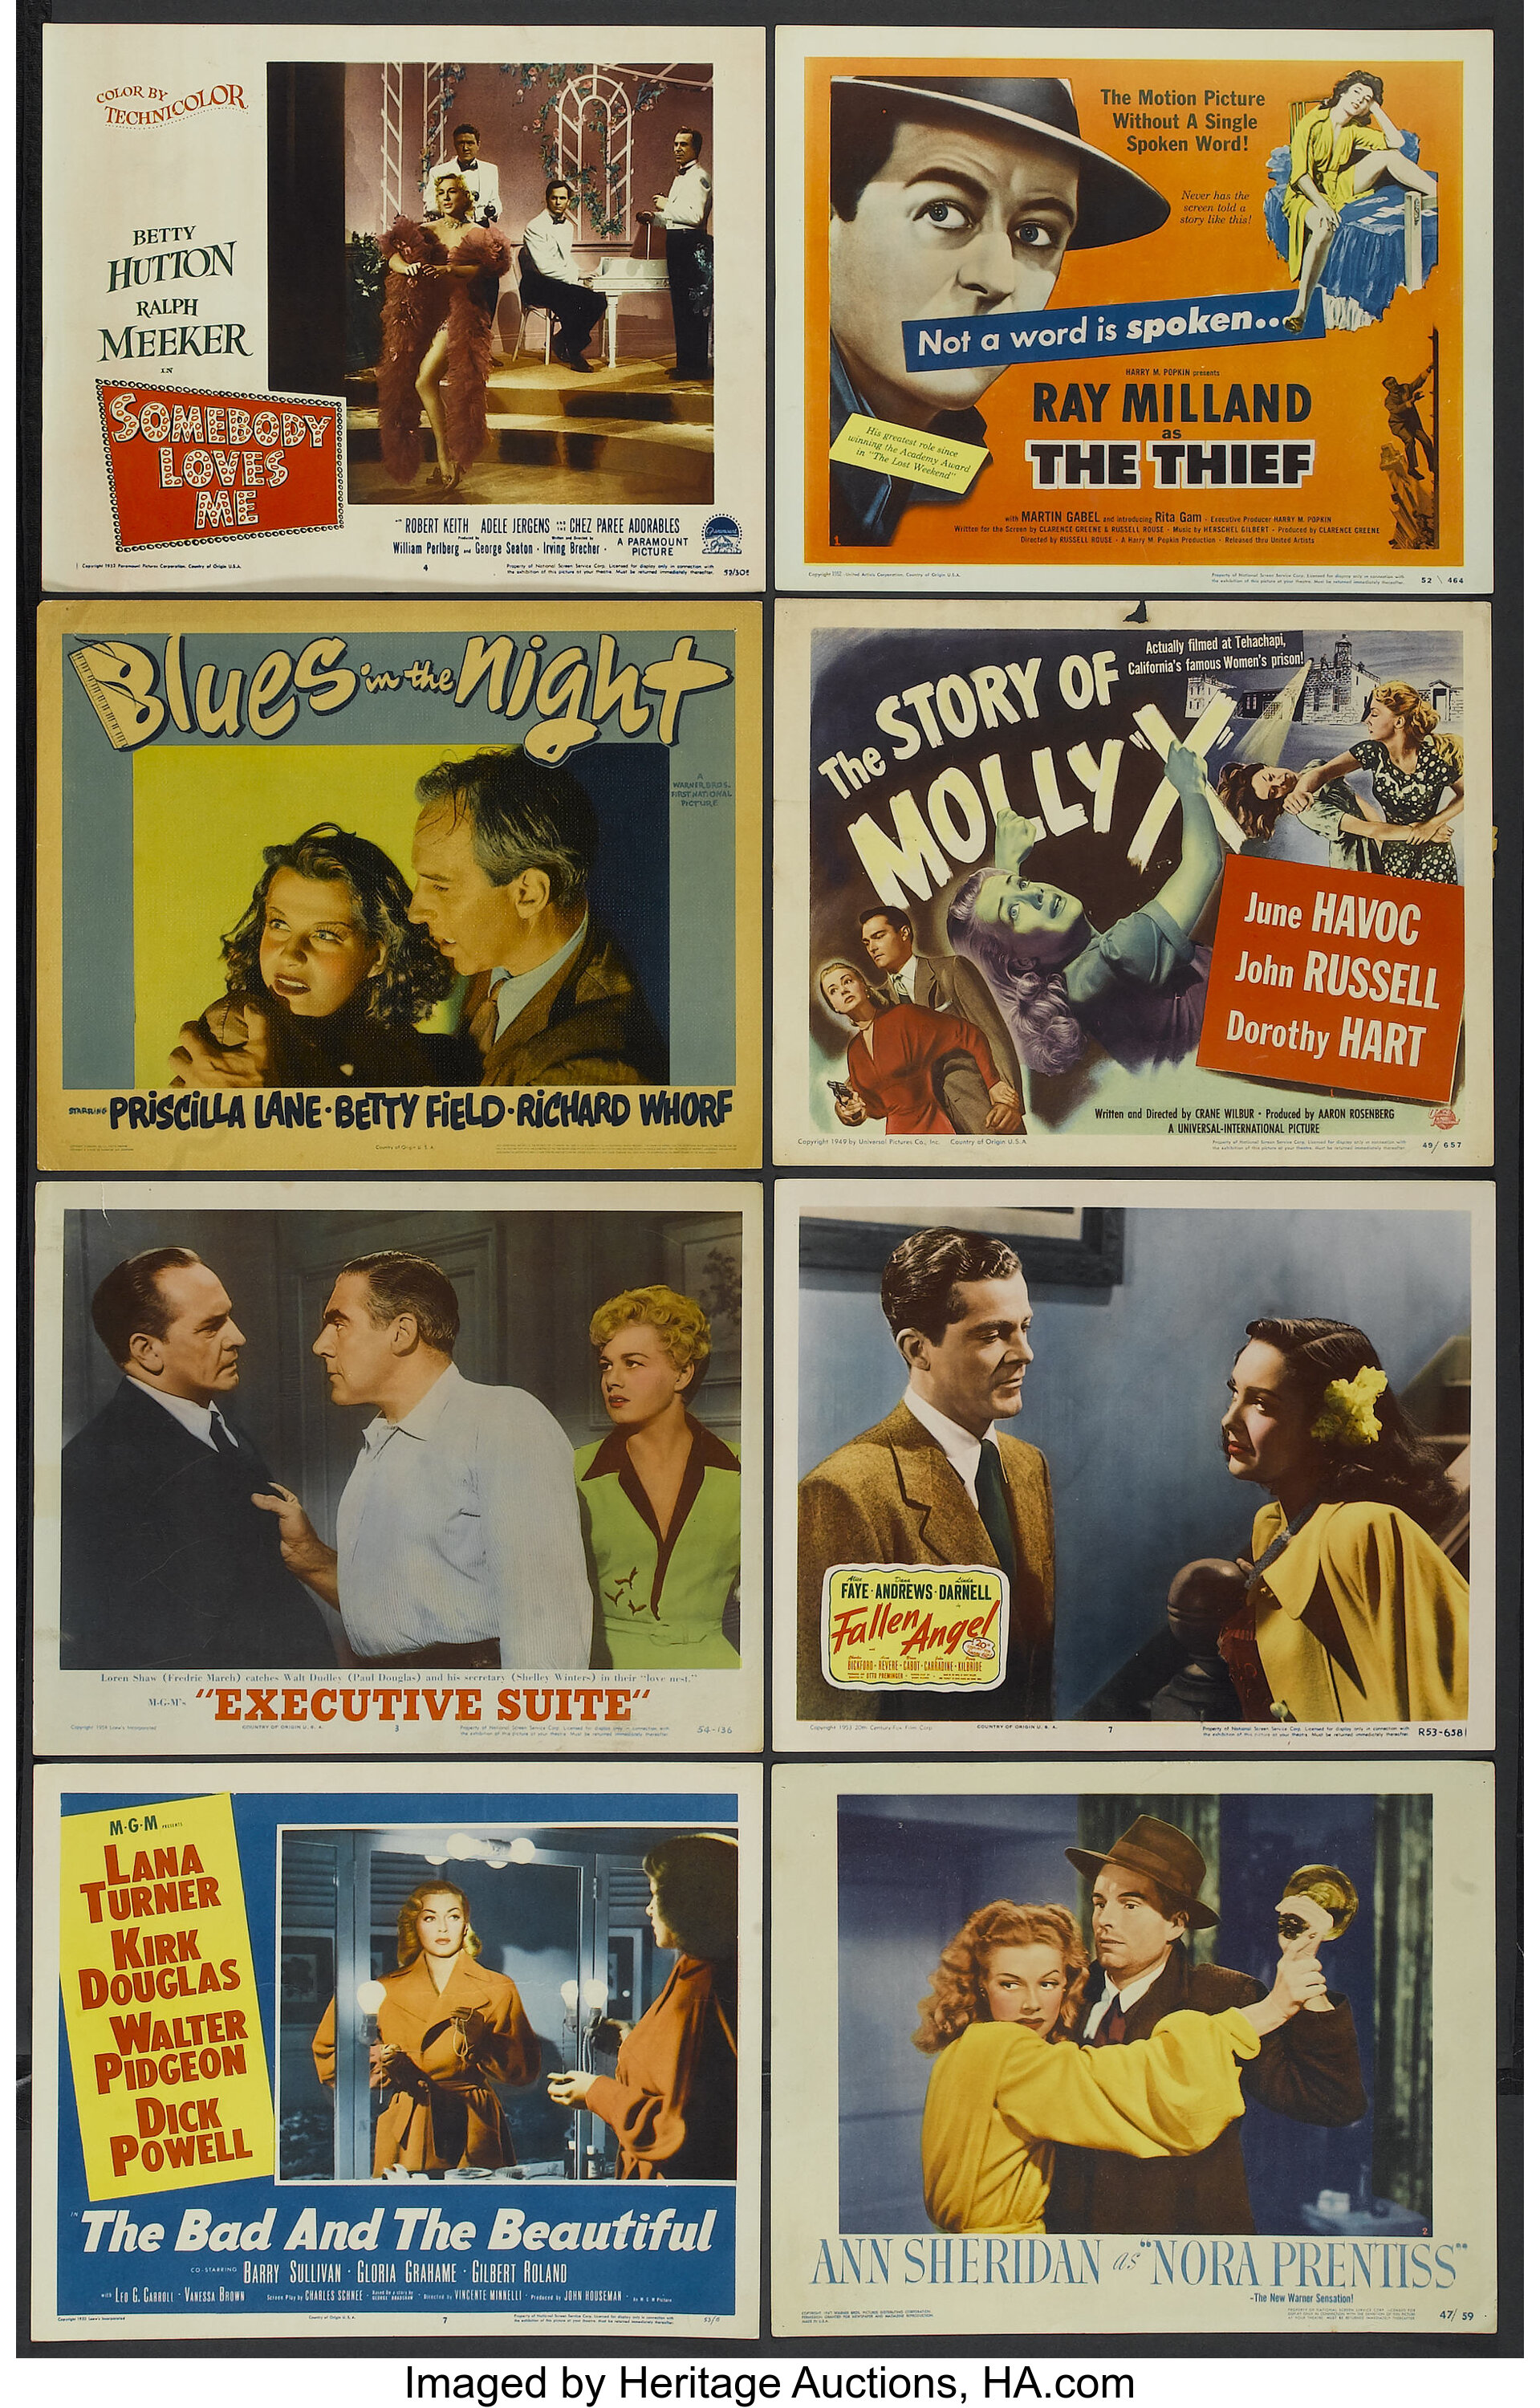 The Bad And The Beautiful Lot Mgm 1953 Lobby Cards 8 11 X Lot 52016 Heritage Auctions 4864